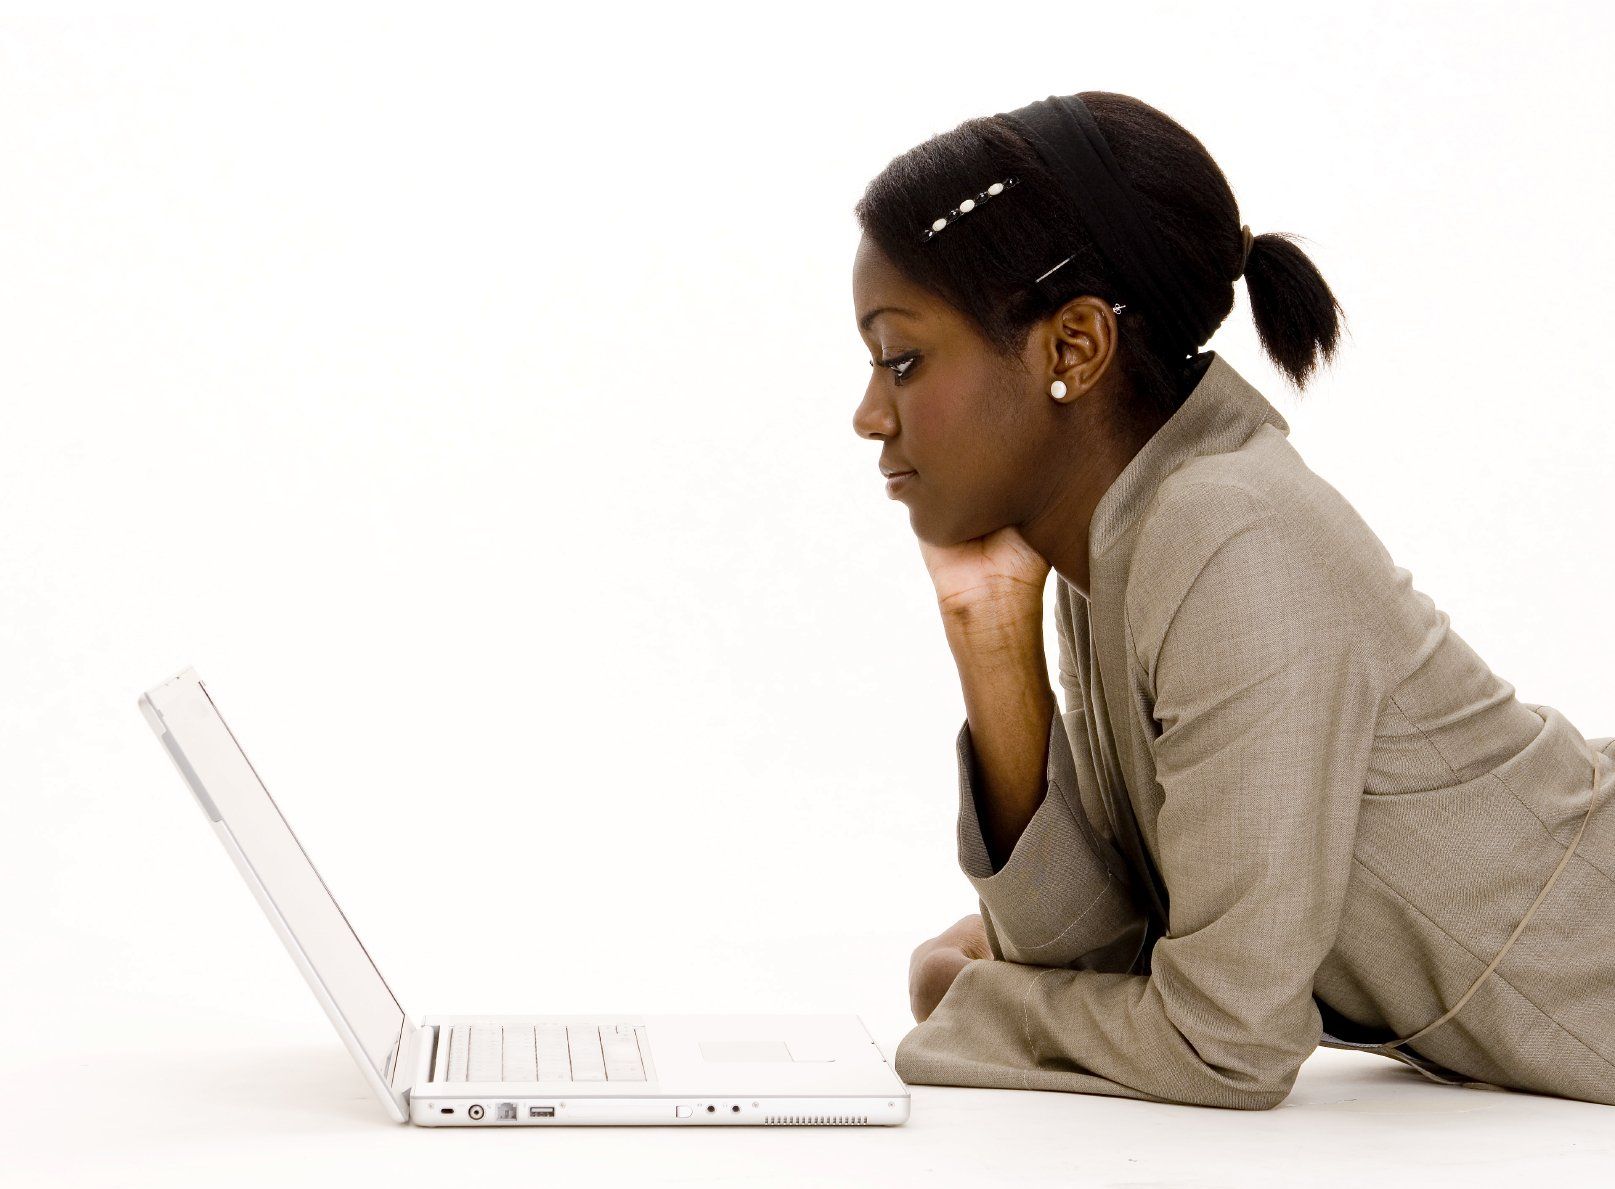 Young, black girl in tan jacket lying on floor with right hand on chin staring at white laptop